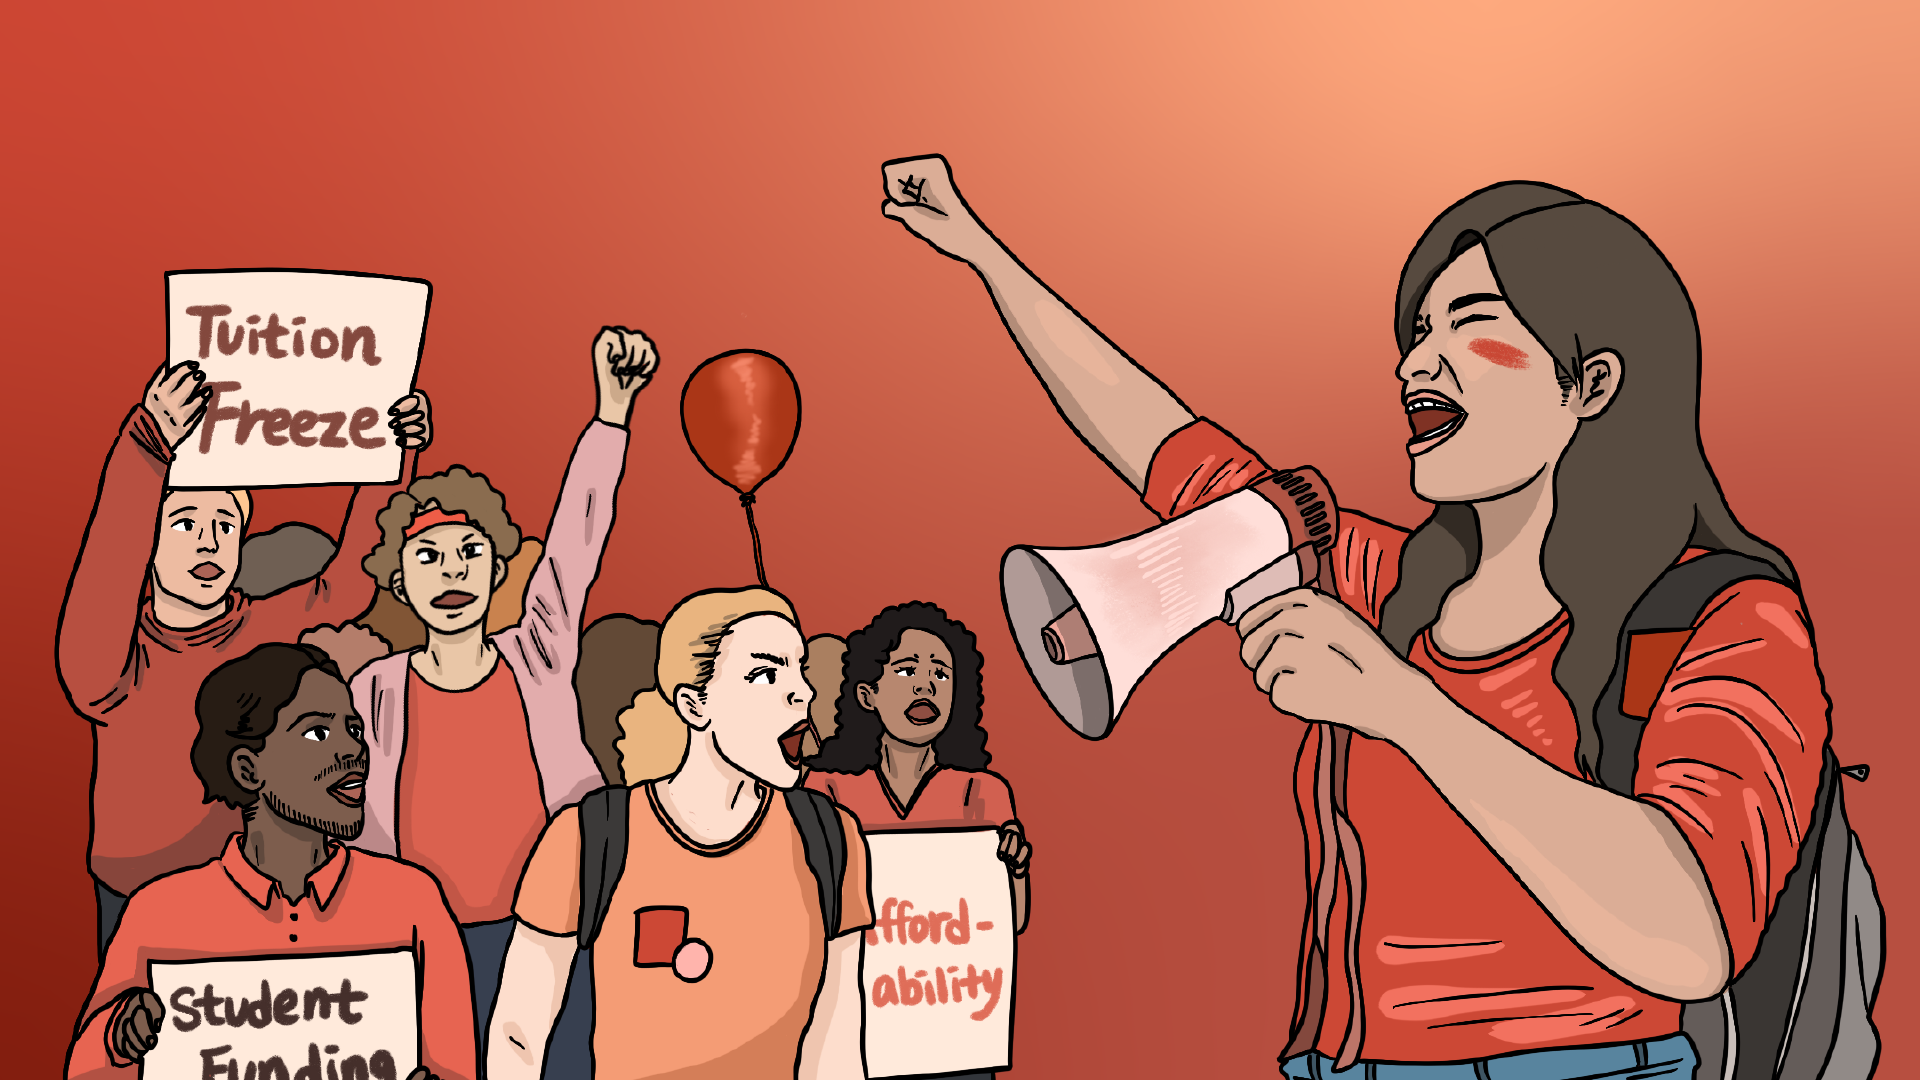 Illustration of a group of people, one with megaphone speaking up against tuition hikes.